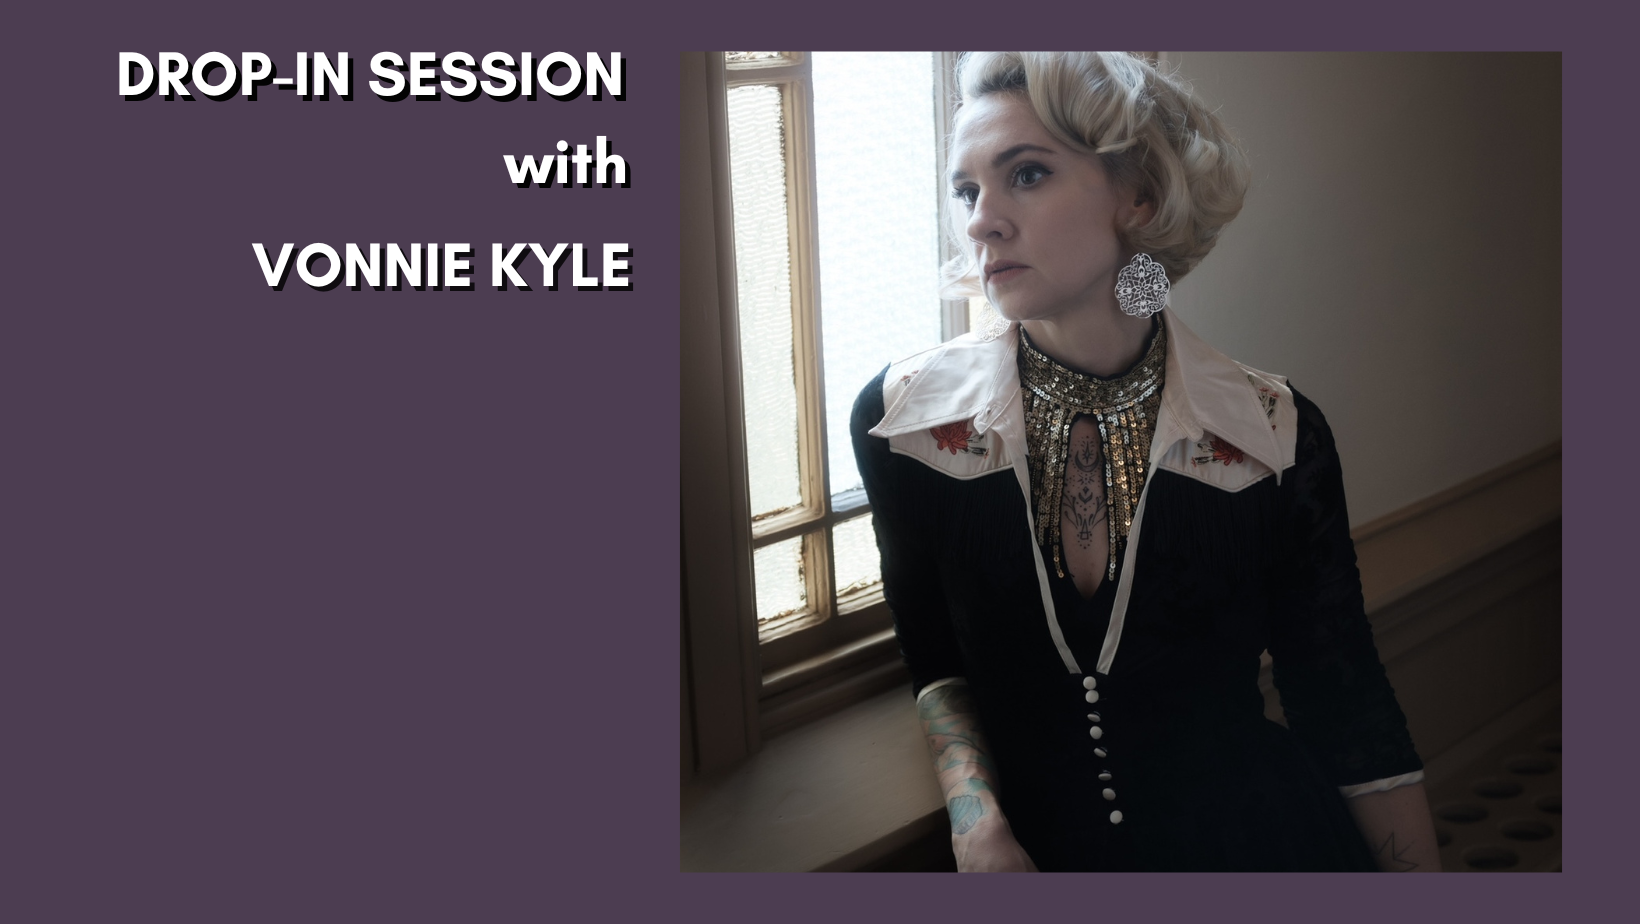 Drop-In Session with Vonnie Kyle